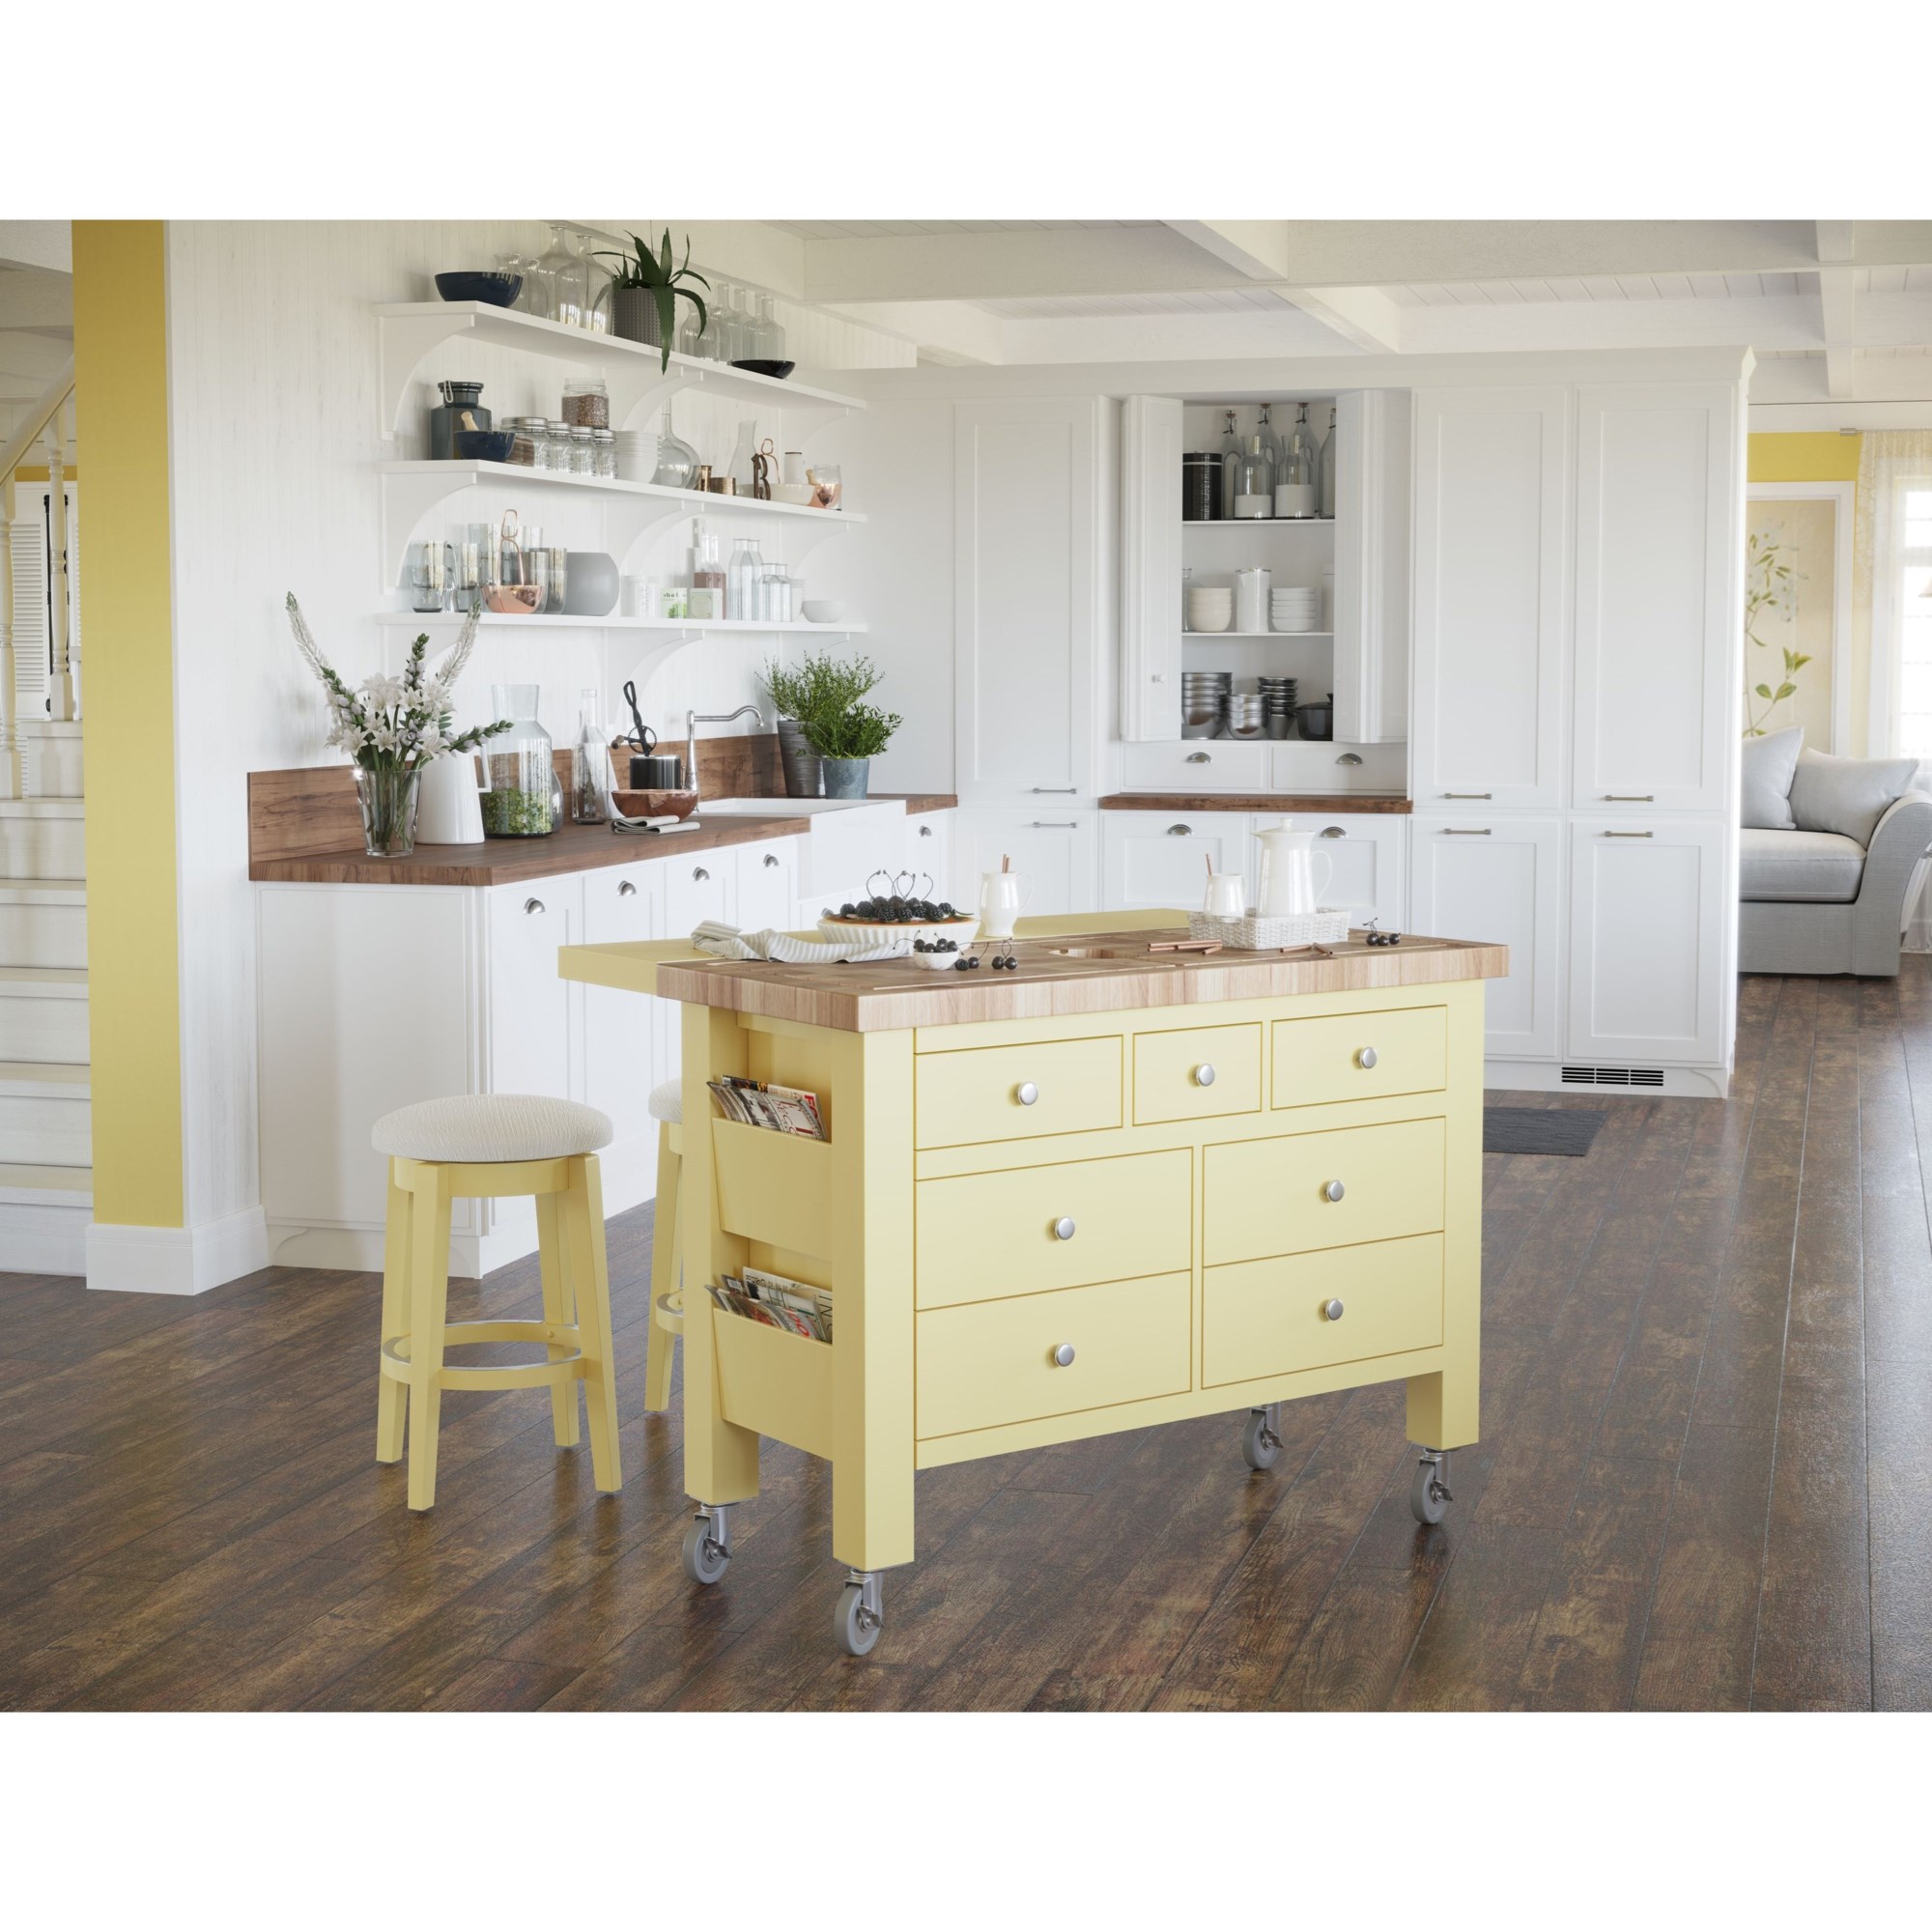 Kitchen Counter And Cabinet Finish Combinations - Royal Palm Closet